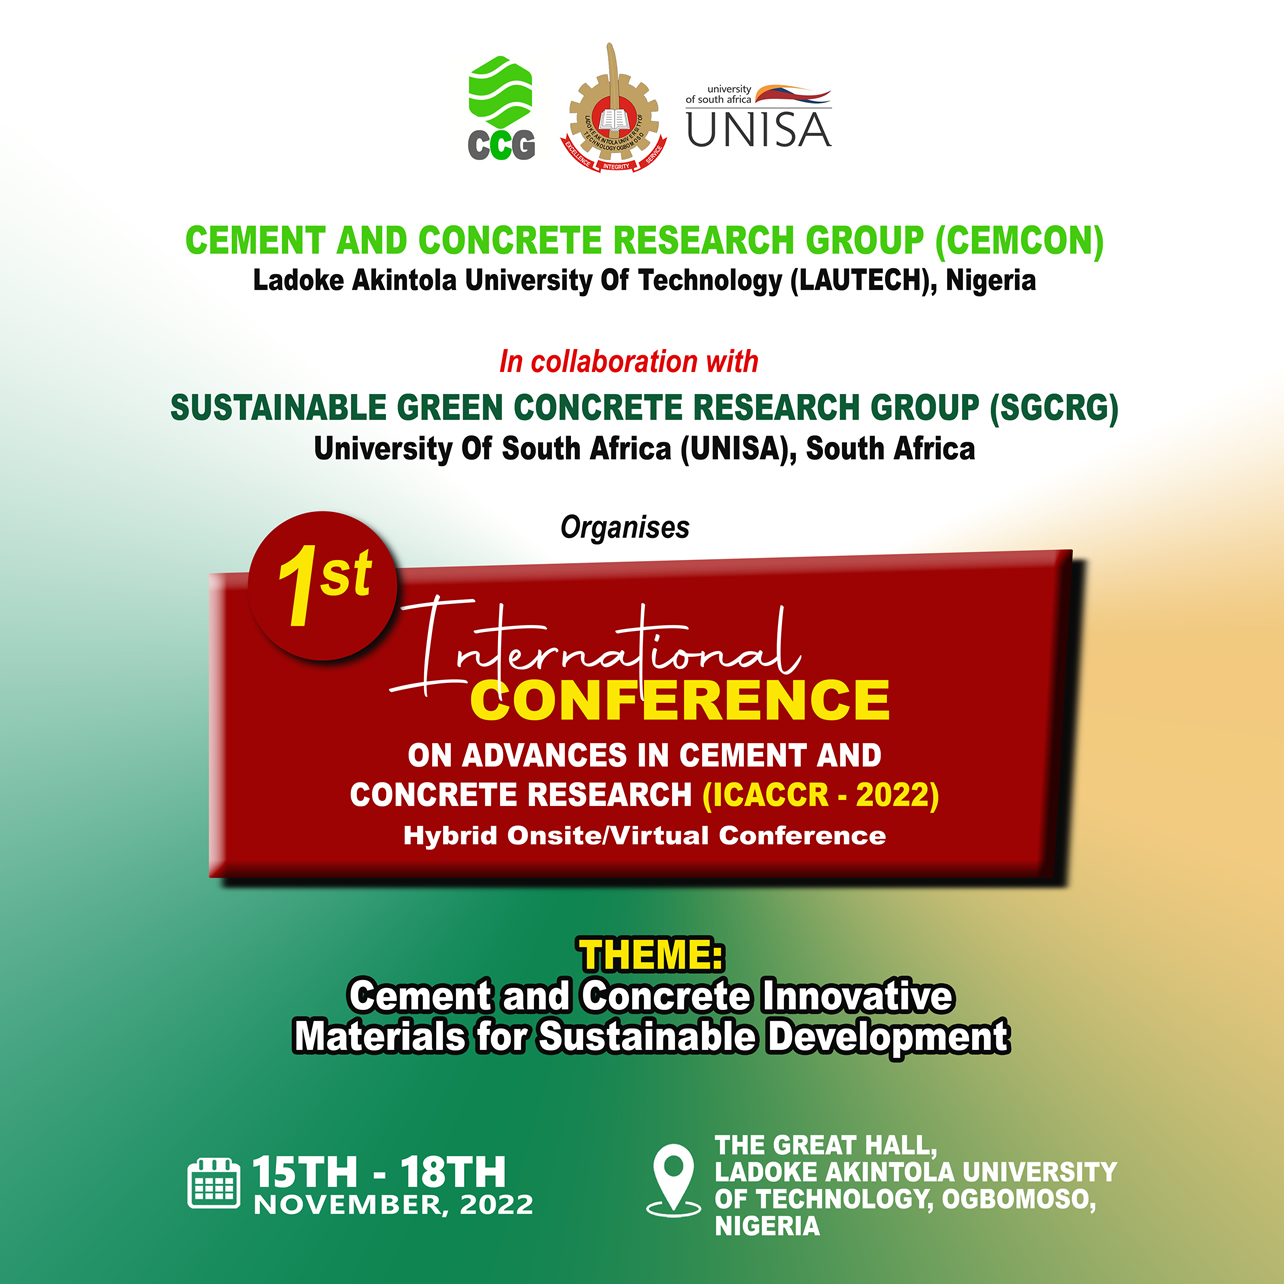 CEMENT AND CONCRETE RESEARCH GROUP (CEMCON)